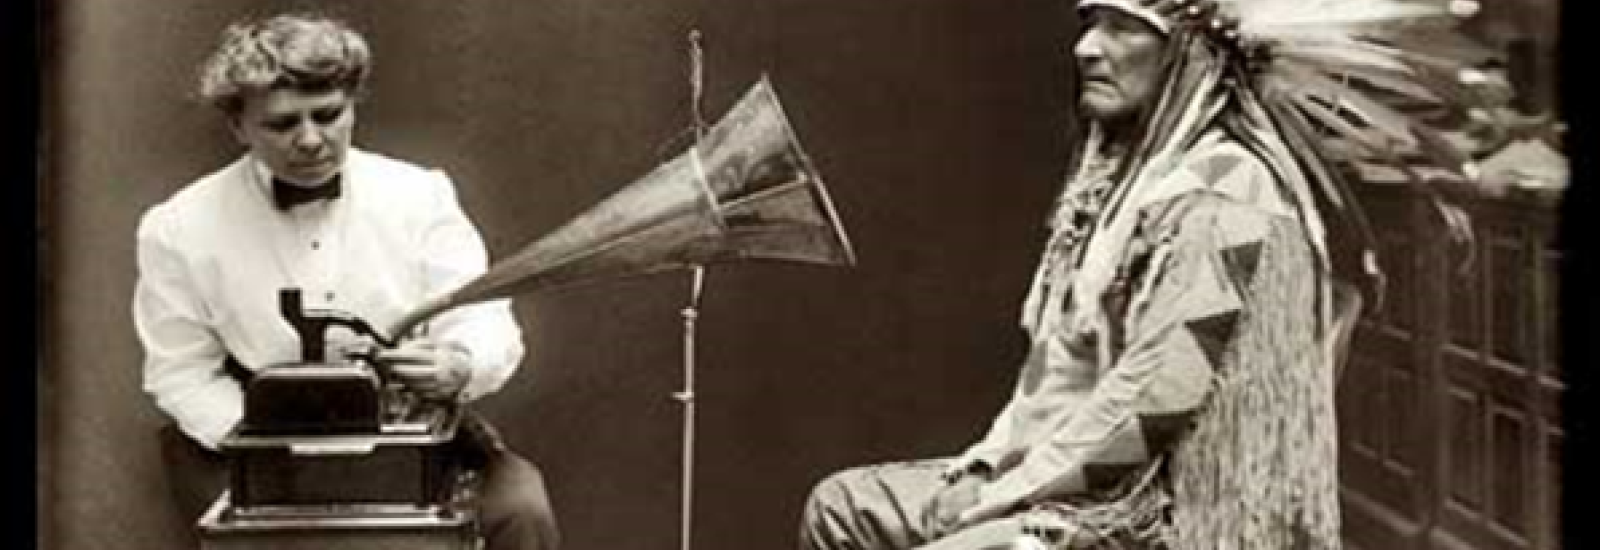 A black and white, historical photograph of a native american, speaking into an antiquitated recording device.